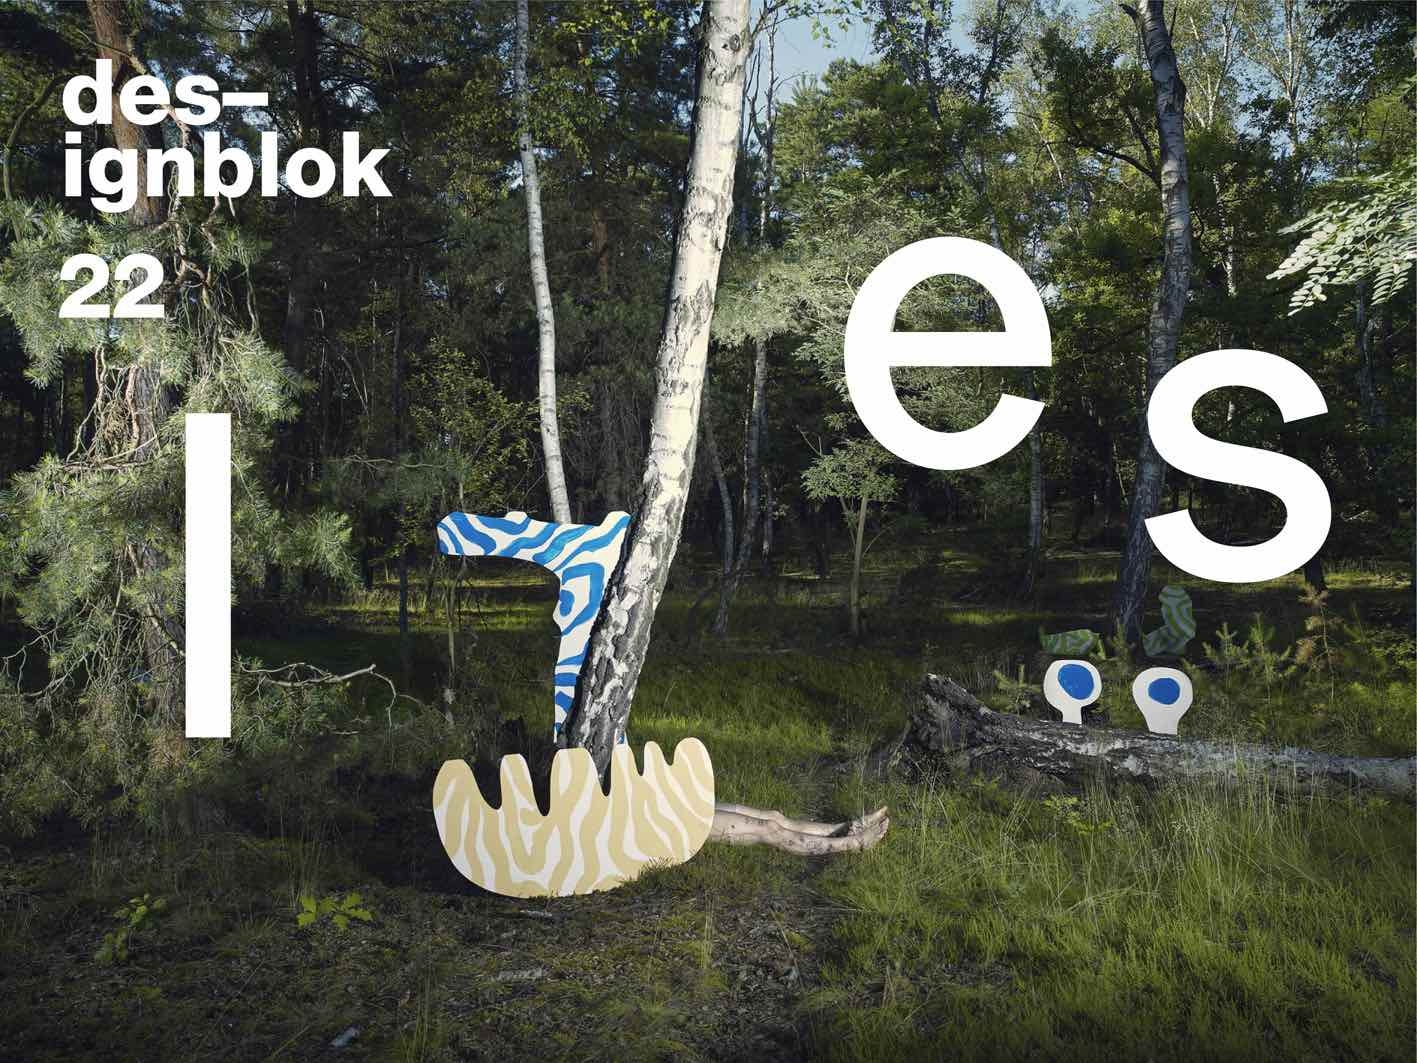 The greatest forest in Czech design will be growing in Prague in two weeks. We present the full program of 24th Designblok